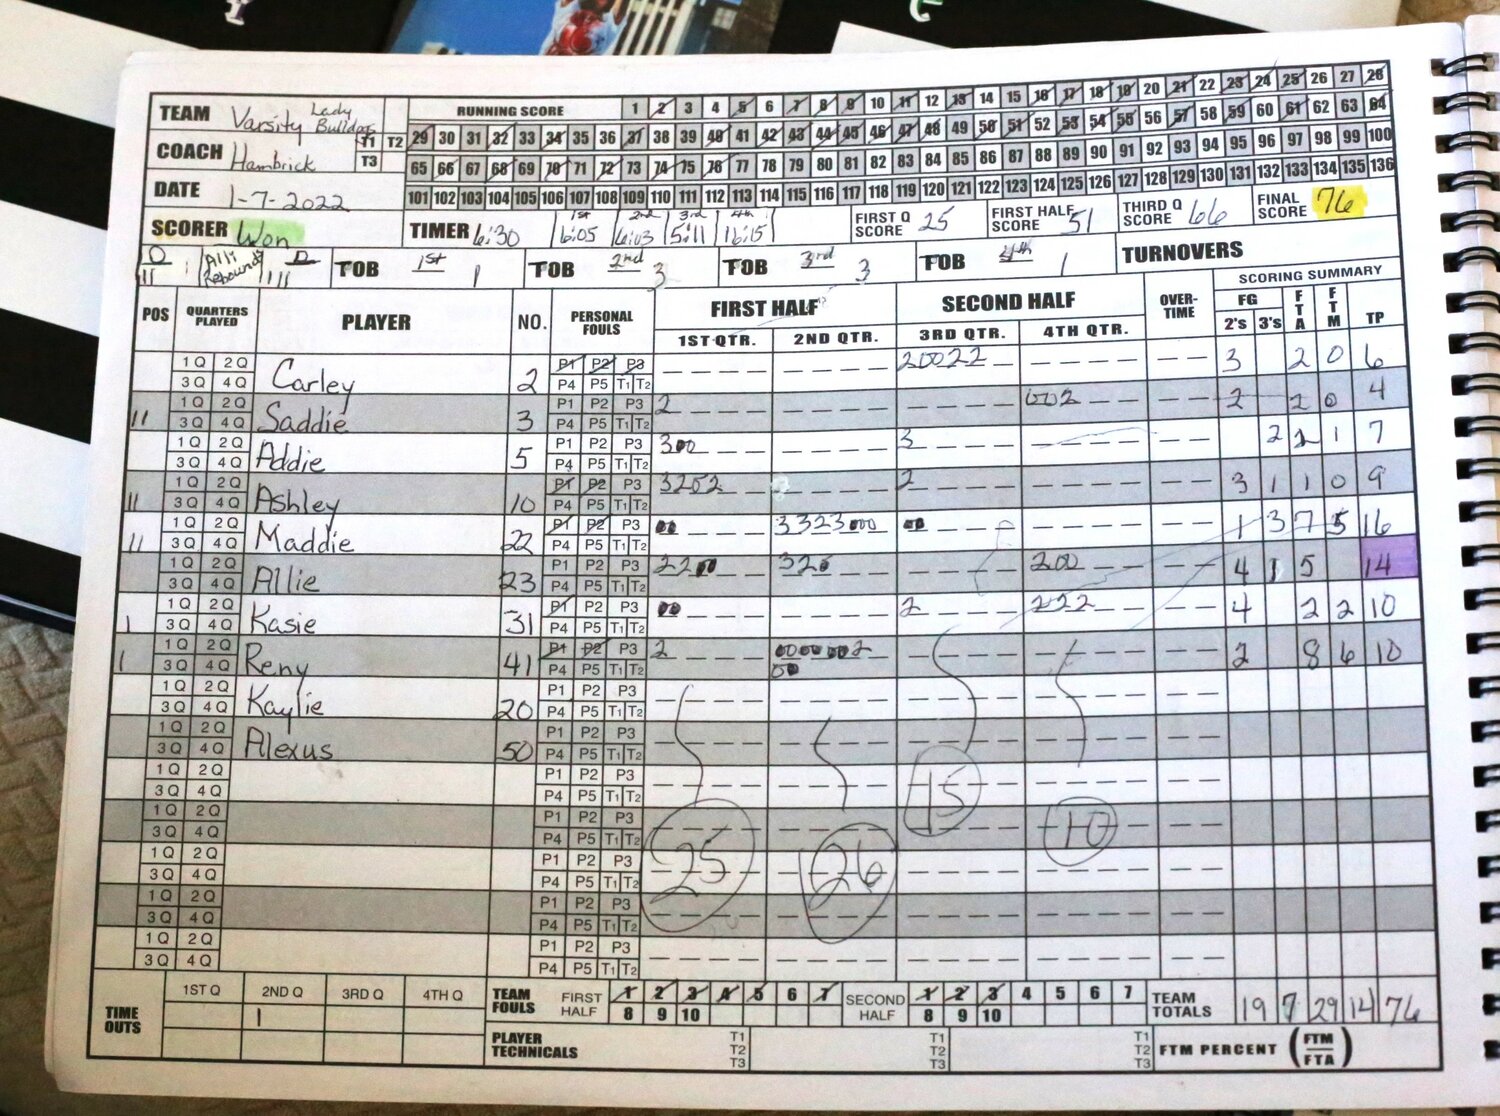 One of hundreds of basketball score sheets compiled by Renee Sessions.